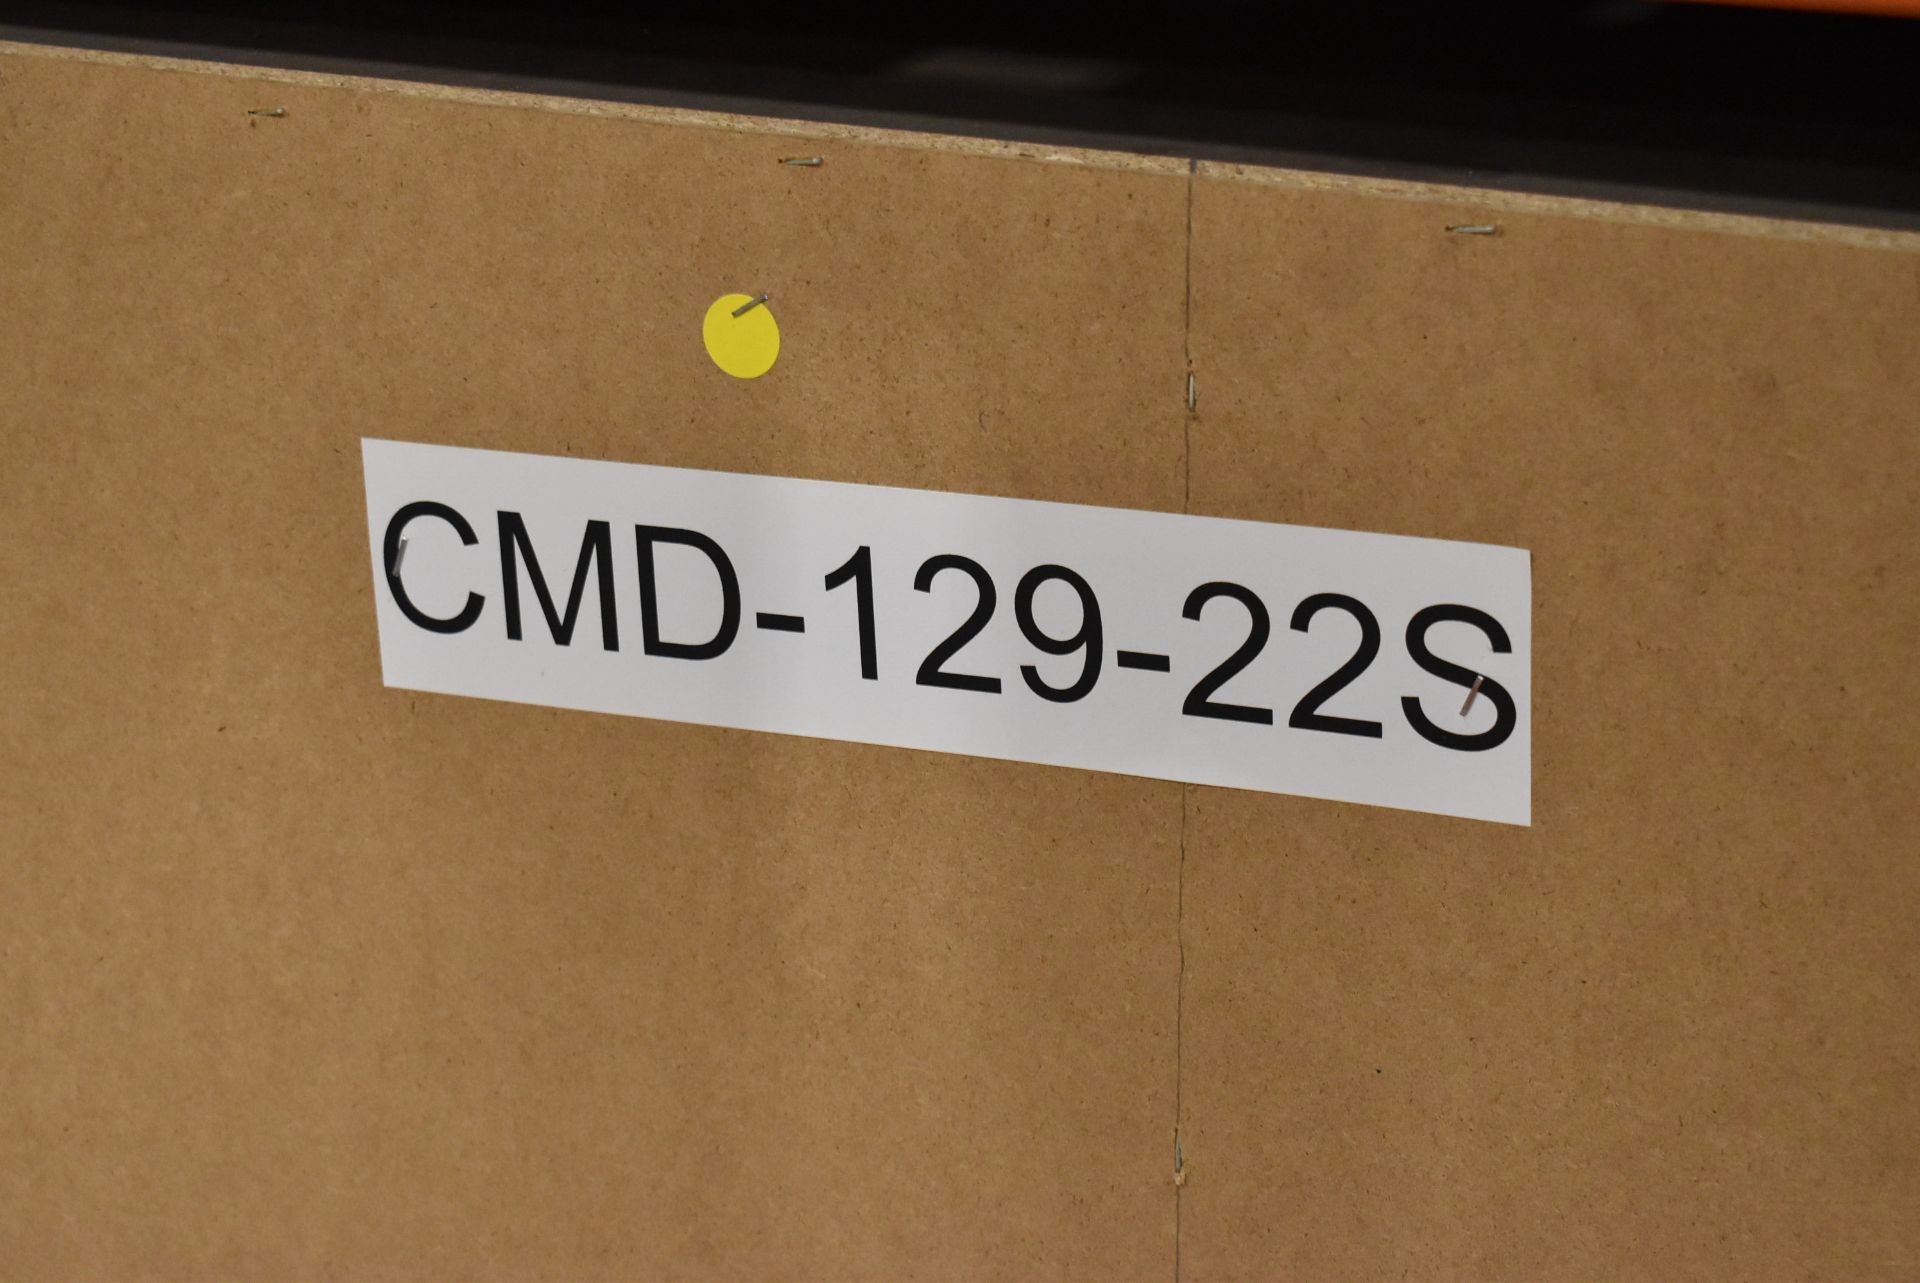 LOT/ (3) WOODEN BOOK CASES (CMD WAREHOUSE) [CMD-129-22S] - Image 4 of 4